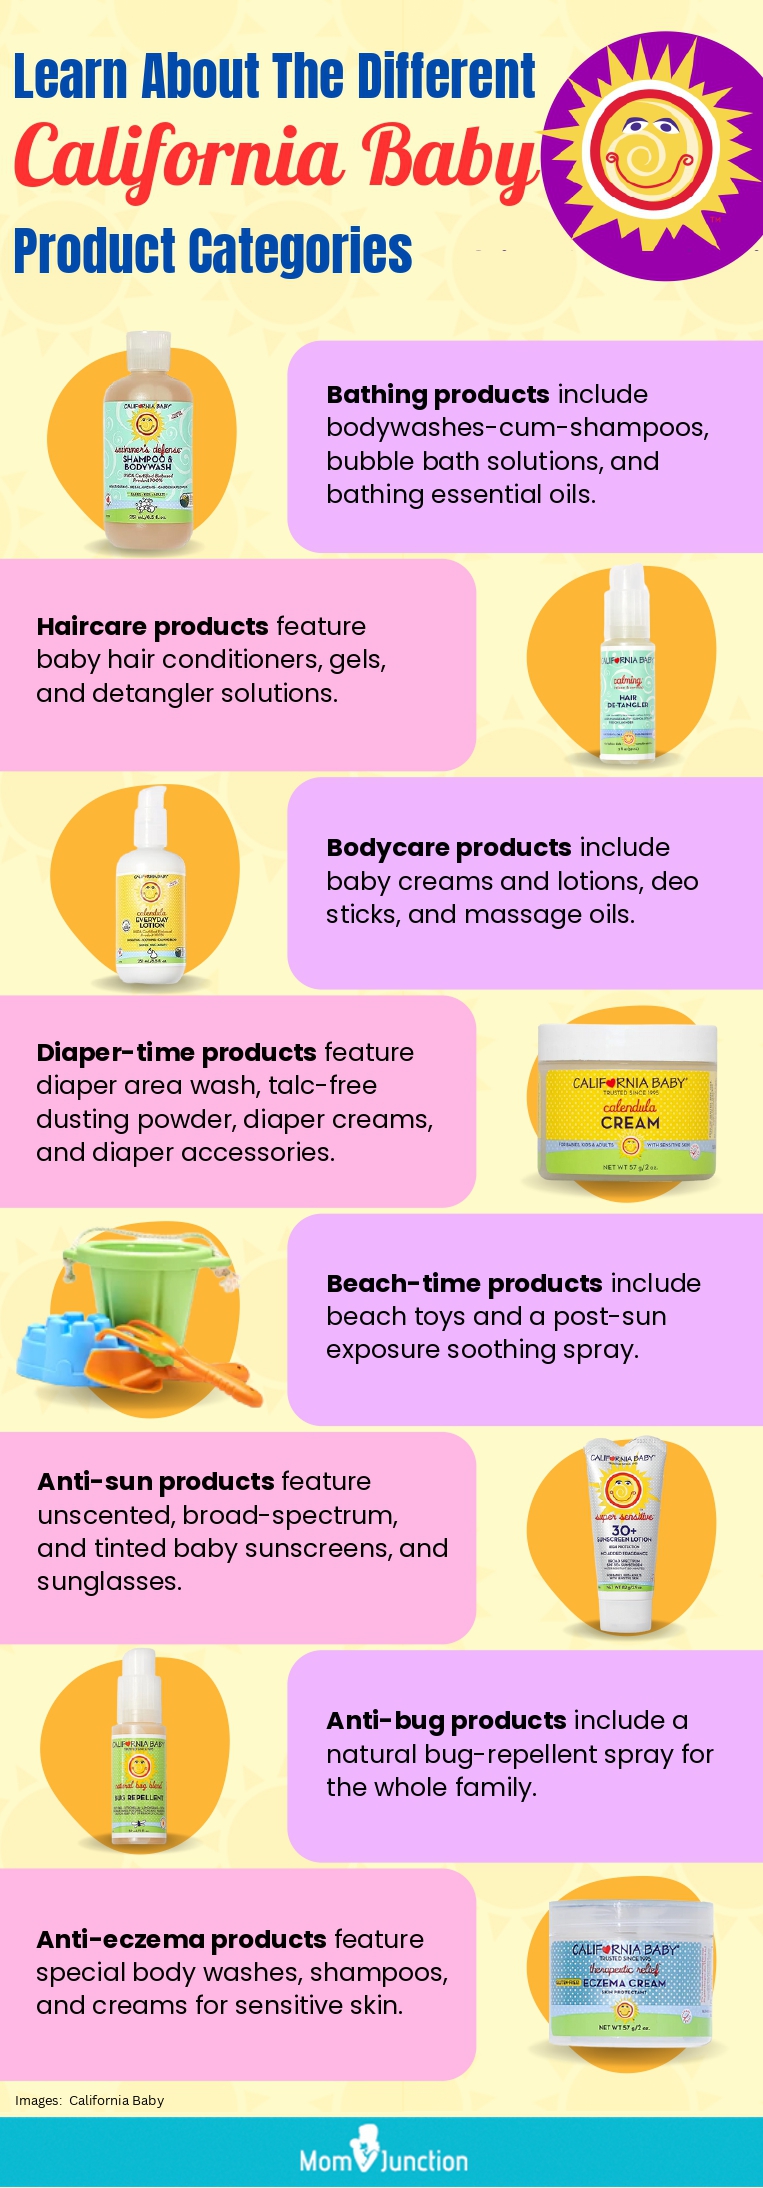 Learn About The Different California Baby Product Categories (infographic)